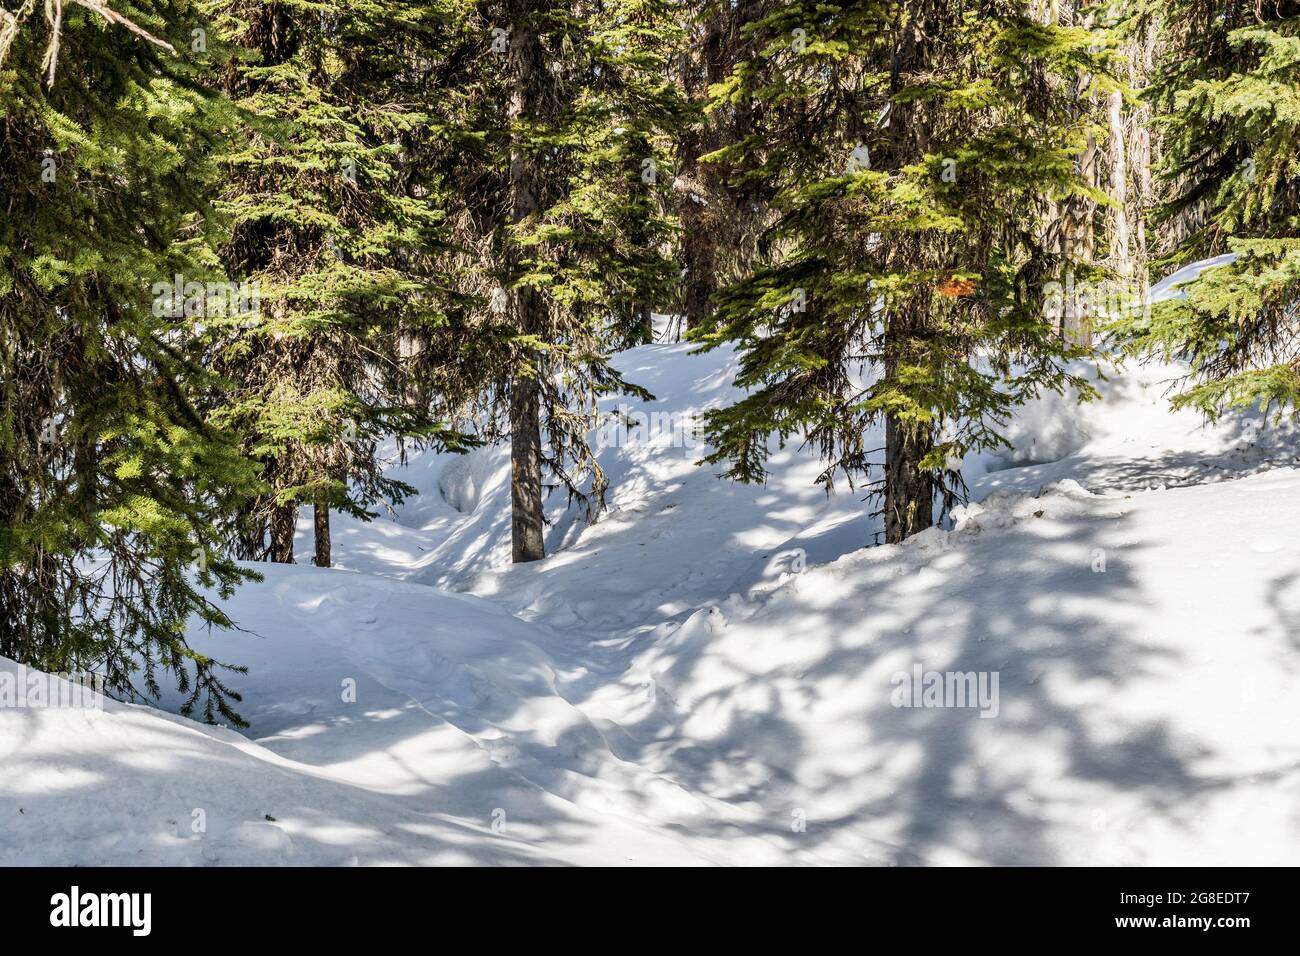 evergreen trees in a winter forest with fresh snow during sunny day. Stock Photo